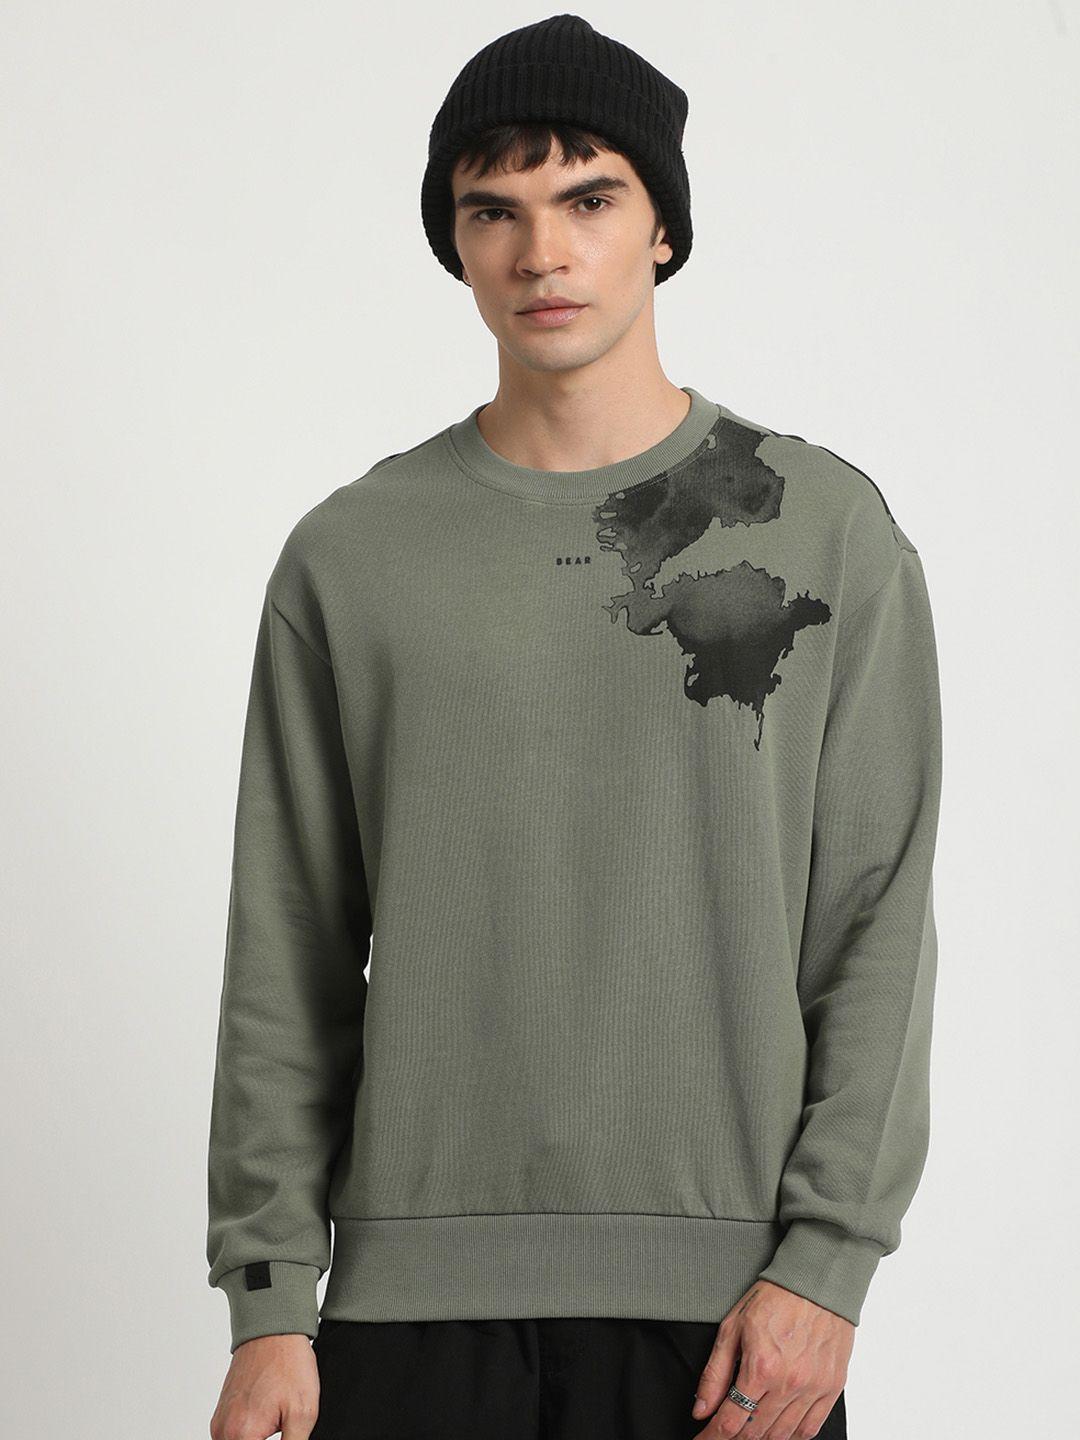 the bear house abstract printed pure cotton pullover sweatshirt